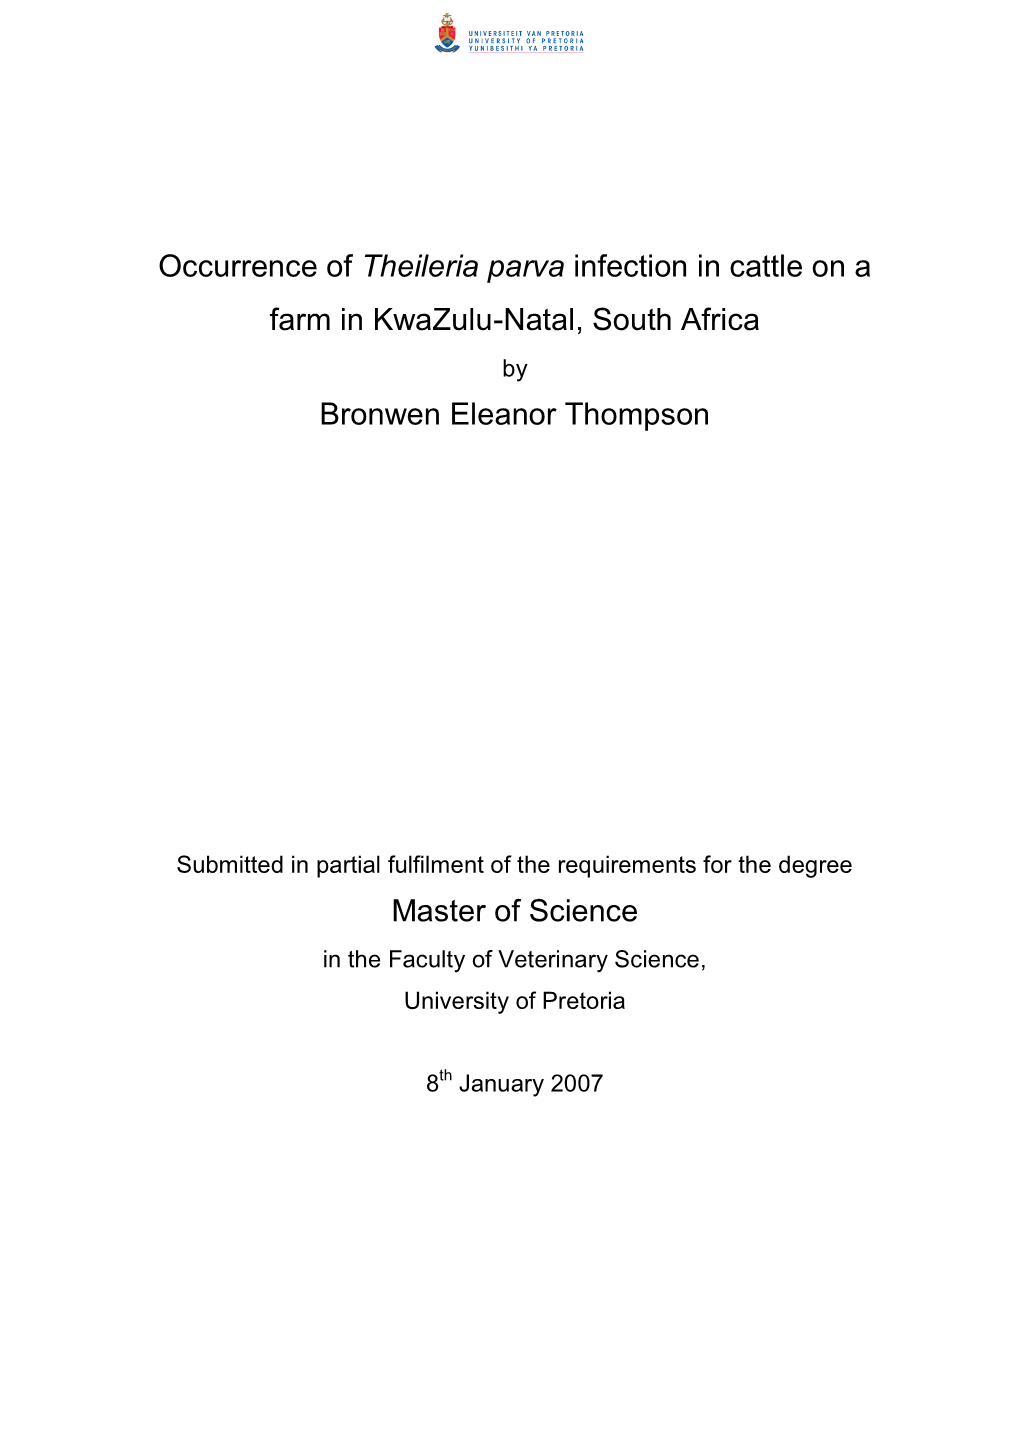 Occurrence of Theileria Parva Infection in Cattle on a Farm in Kwazulu-Natal, South Africa by Bronwen Eleanor Thompson